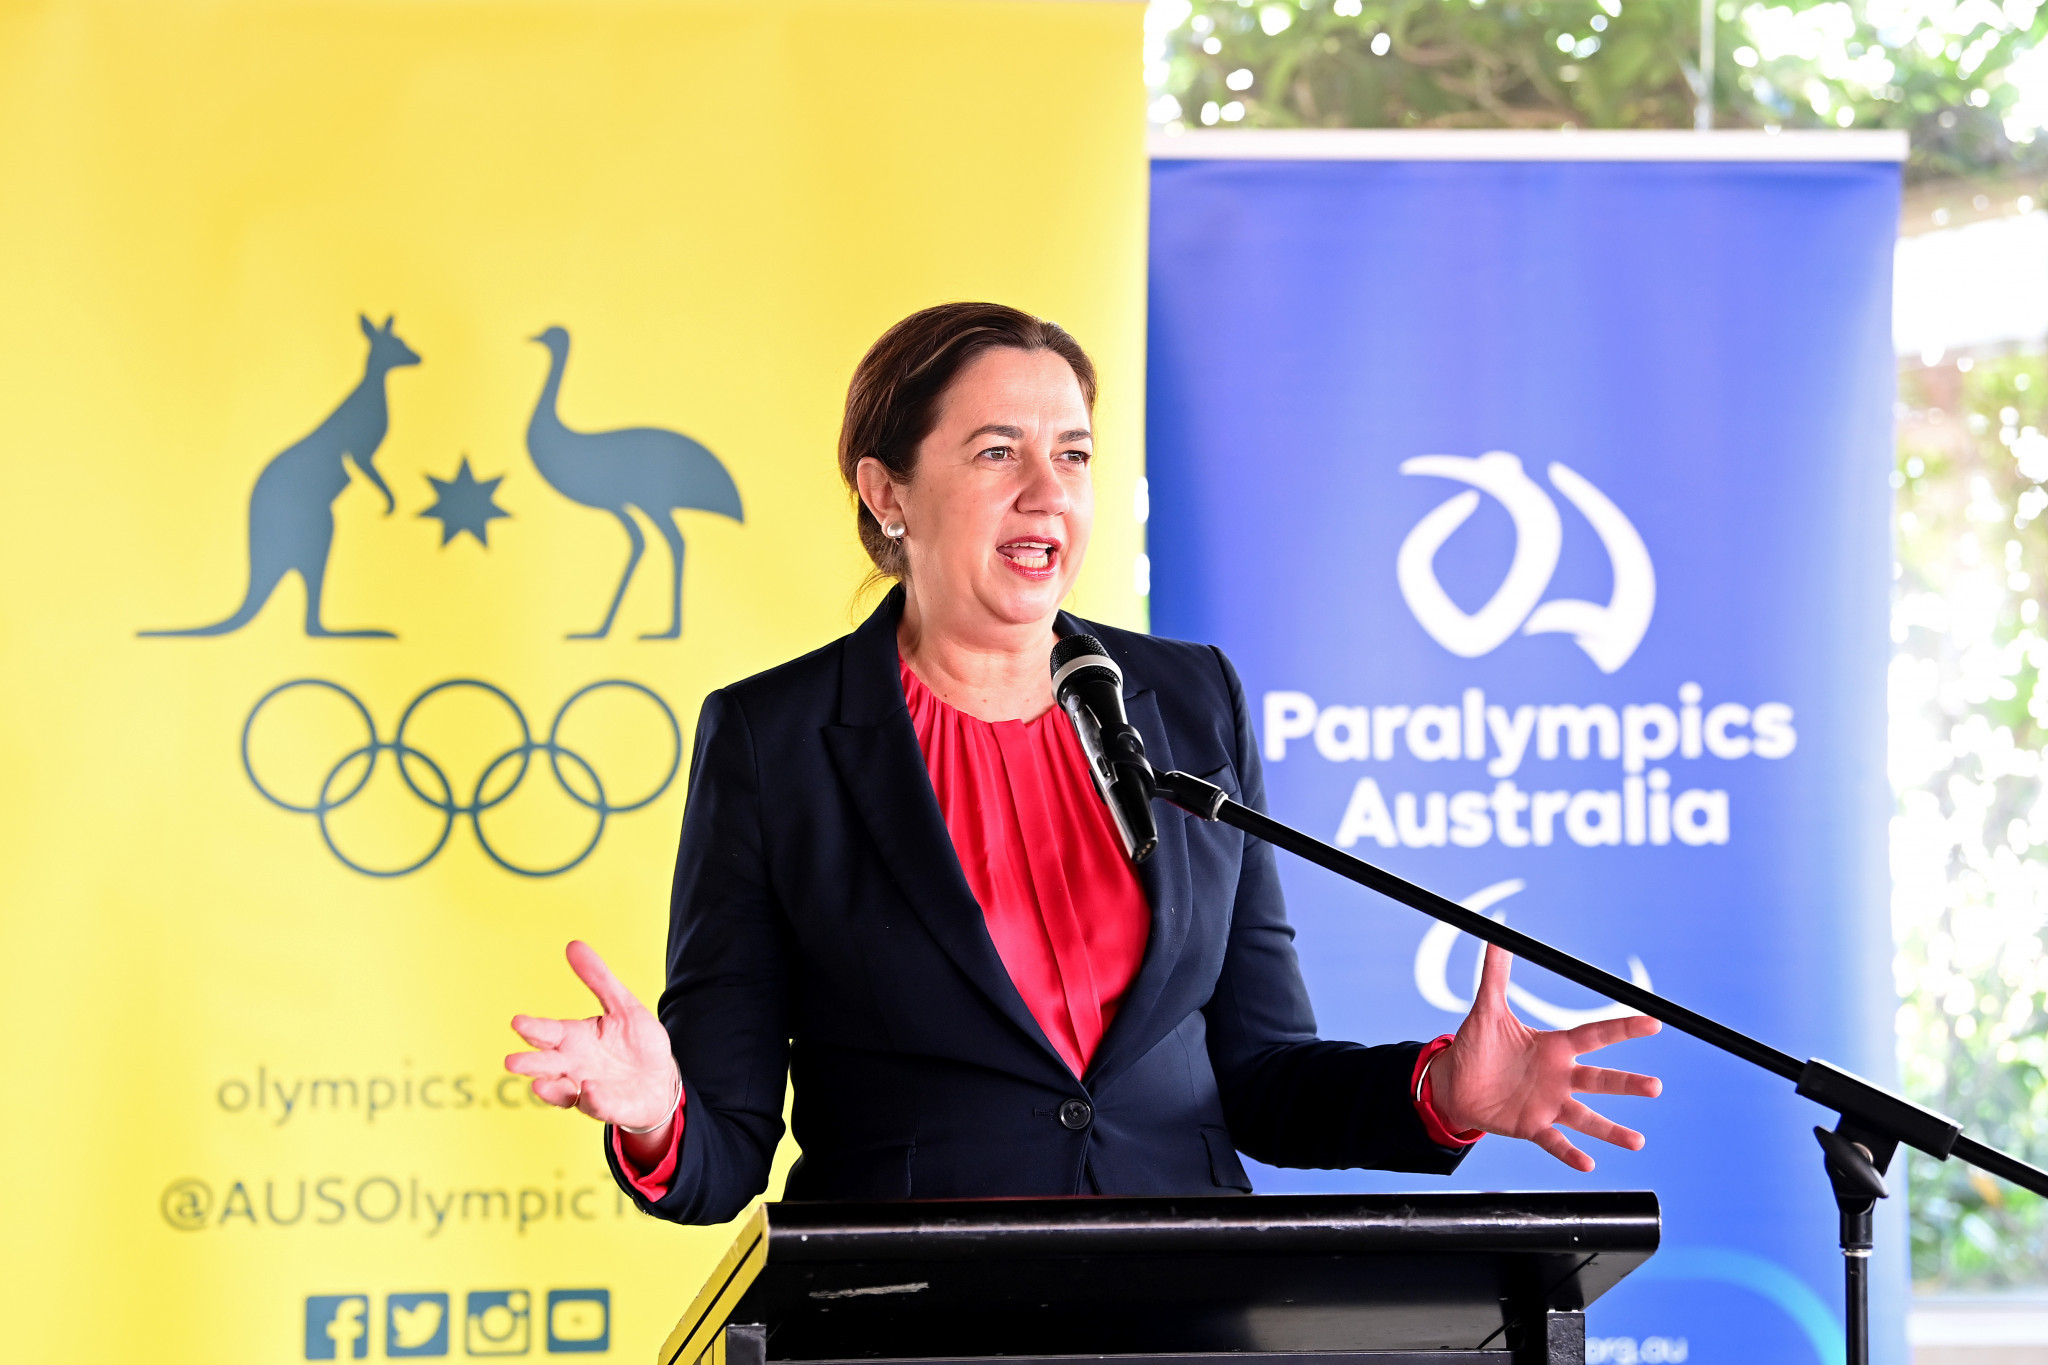 Palaszczuk claims Brisbane 2032 can deliver "golden age" for Queensland